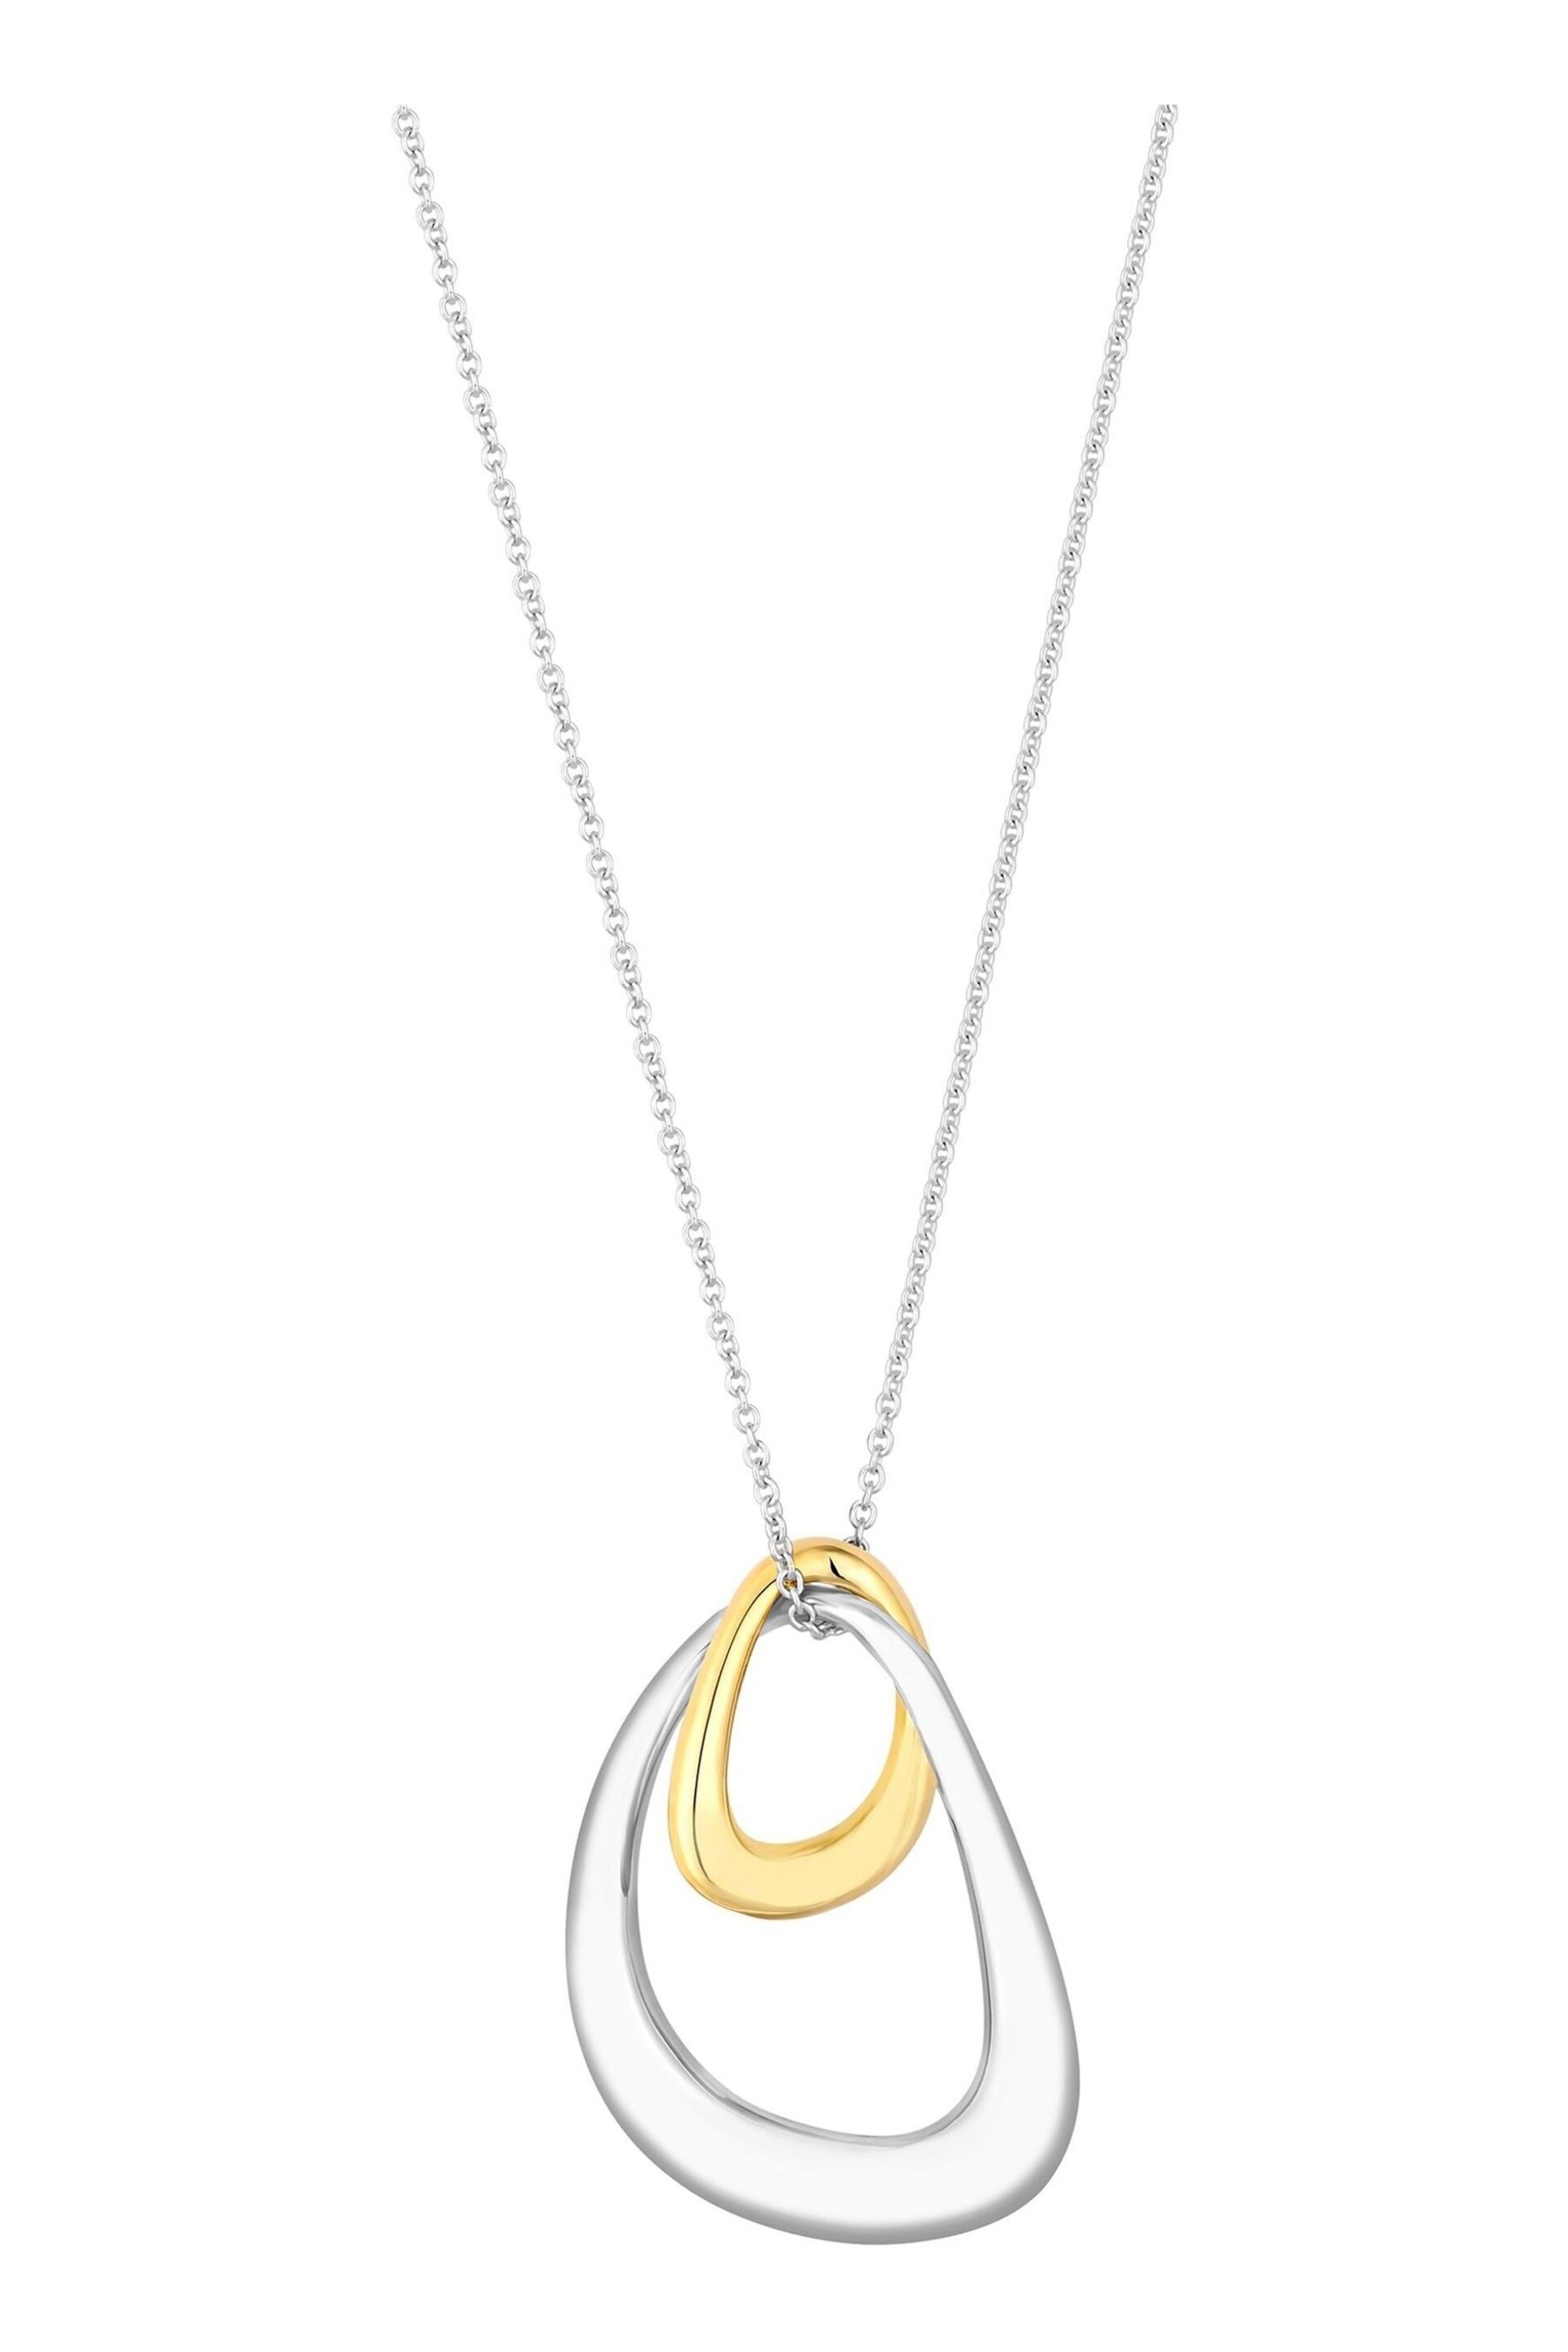 Simply Silver White Two Tone Plated Sterling Silver 925 Pendant Necklace - Image 1 of 2